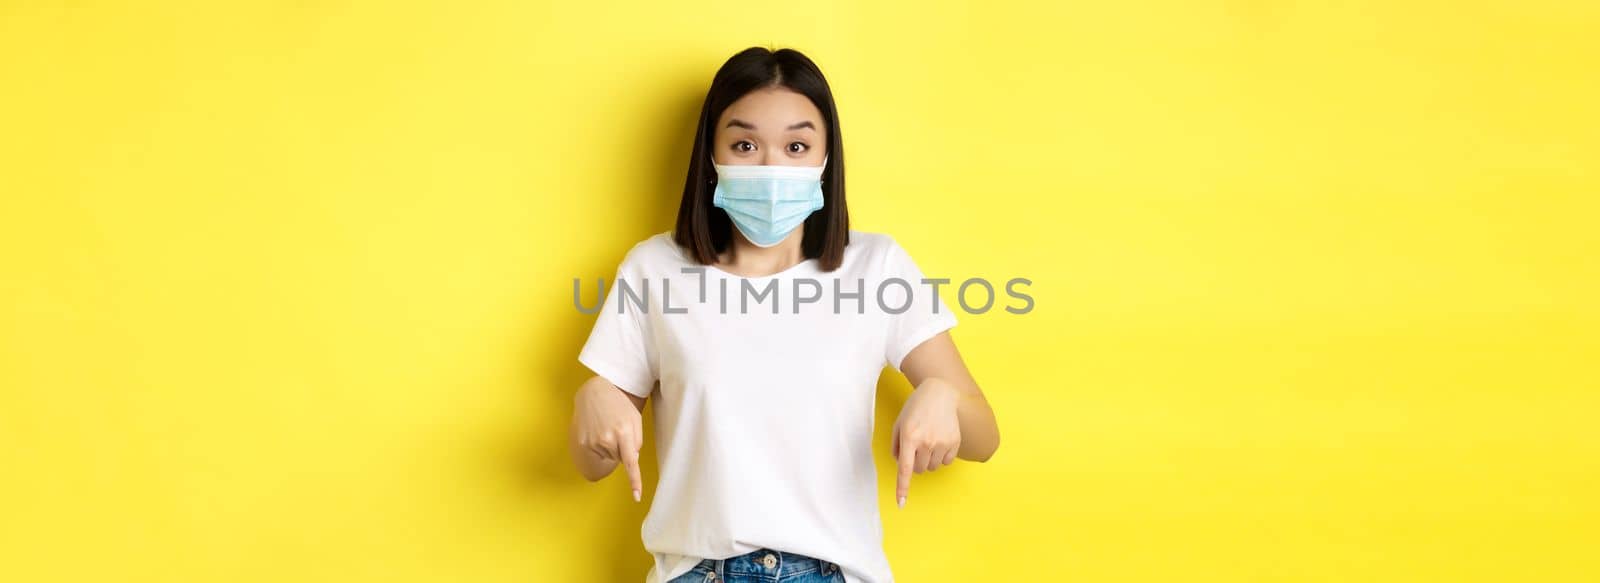 Covid-19, pandemic and social distancing concept. Amazed asian woman in medical mask, showing advertisement, pointing right and smiling, yellow background.